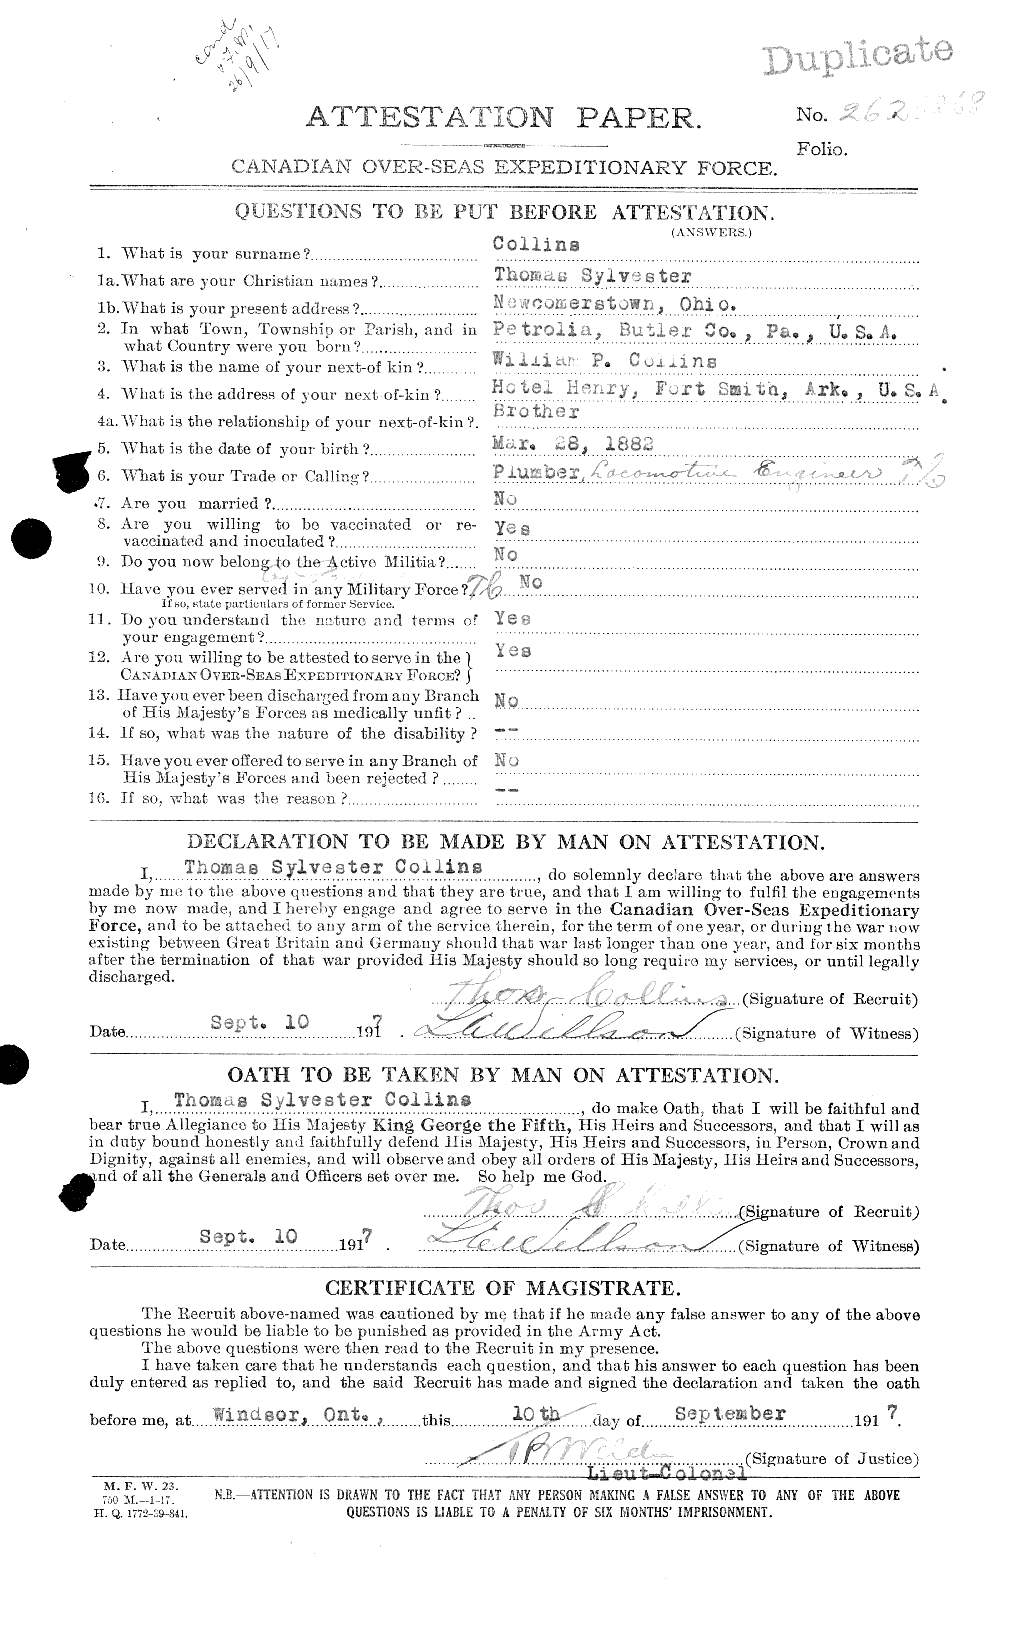 Personnel Records of the First World War - CEF 040673a